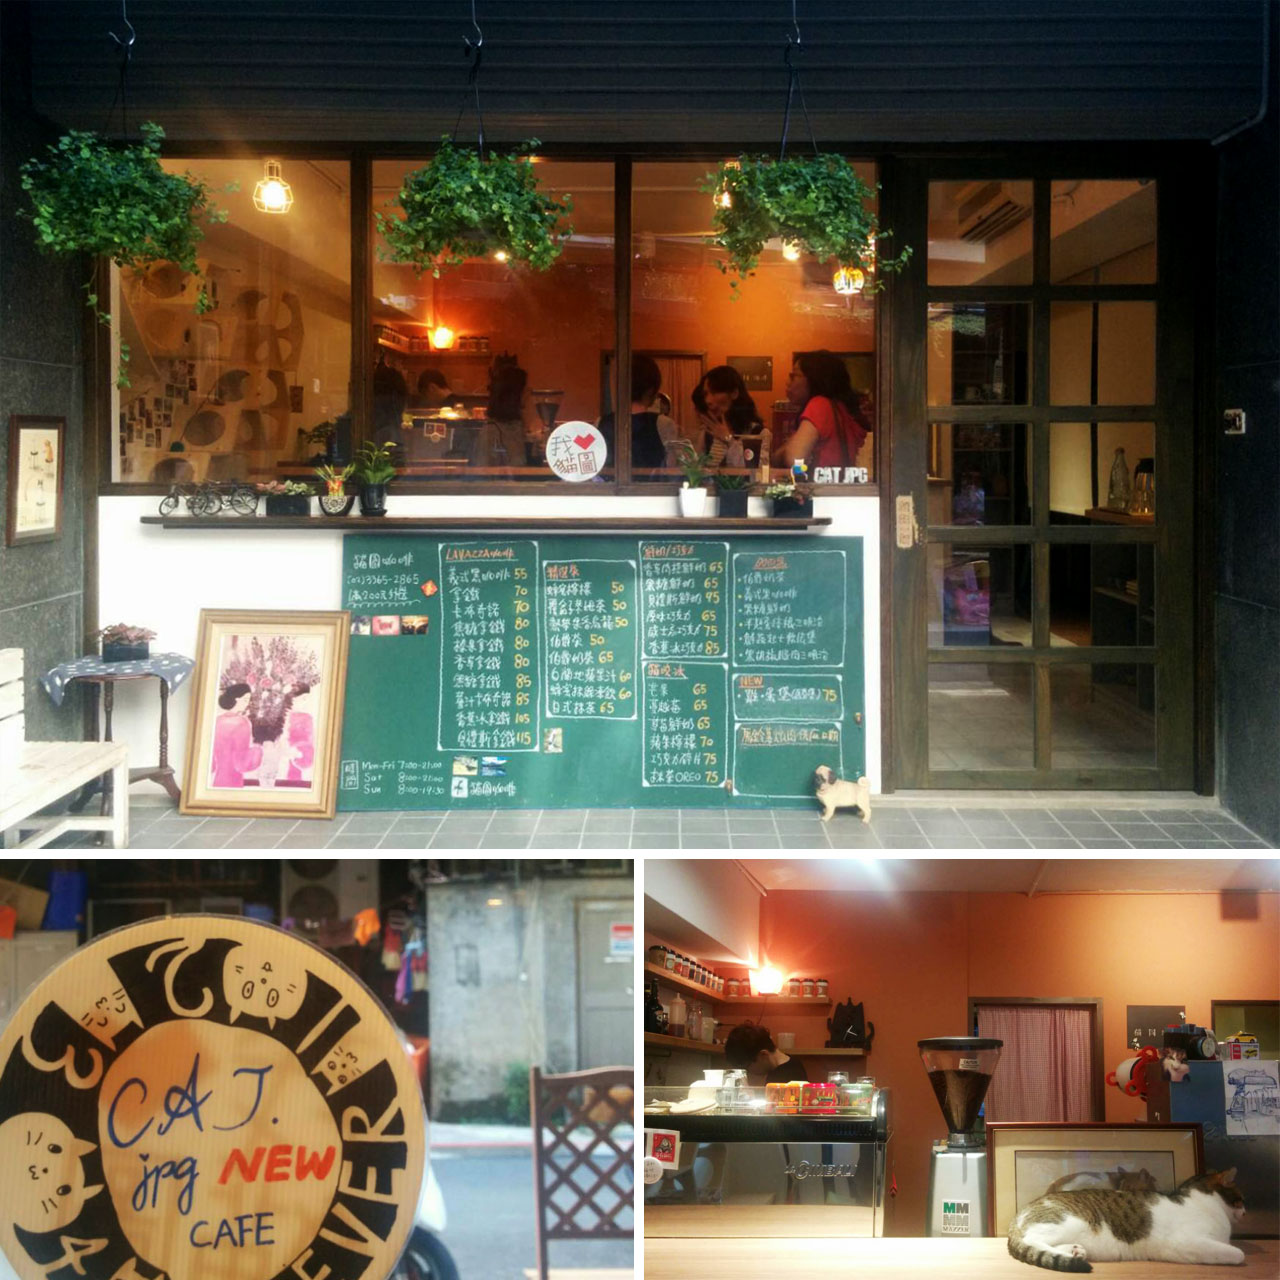 Photos of the new Cat.jpg Cafe